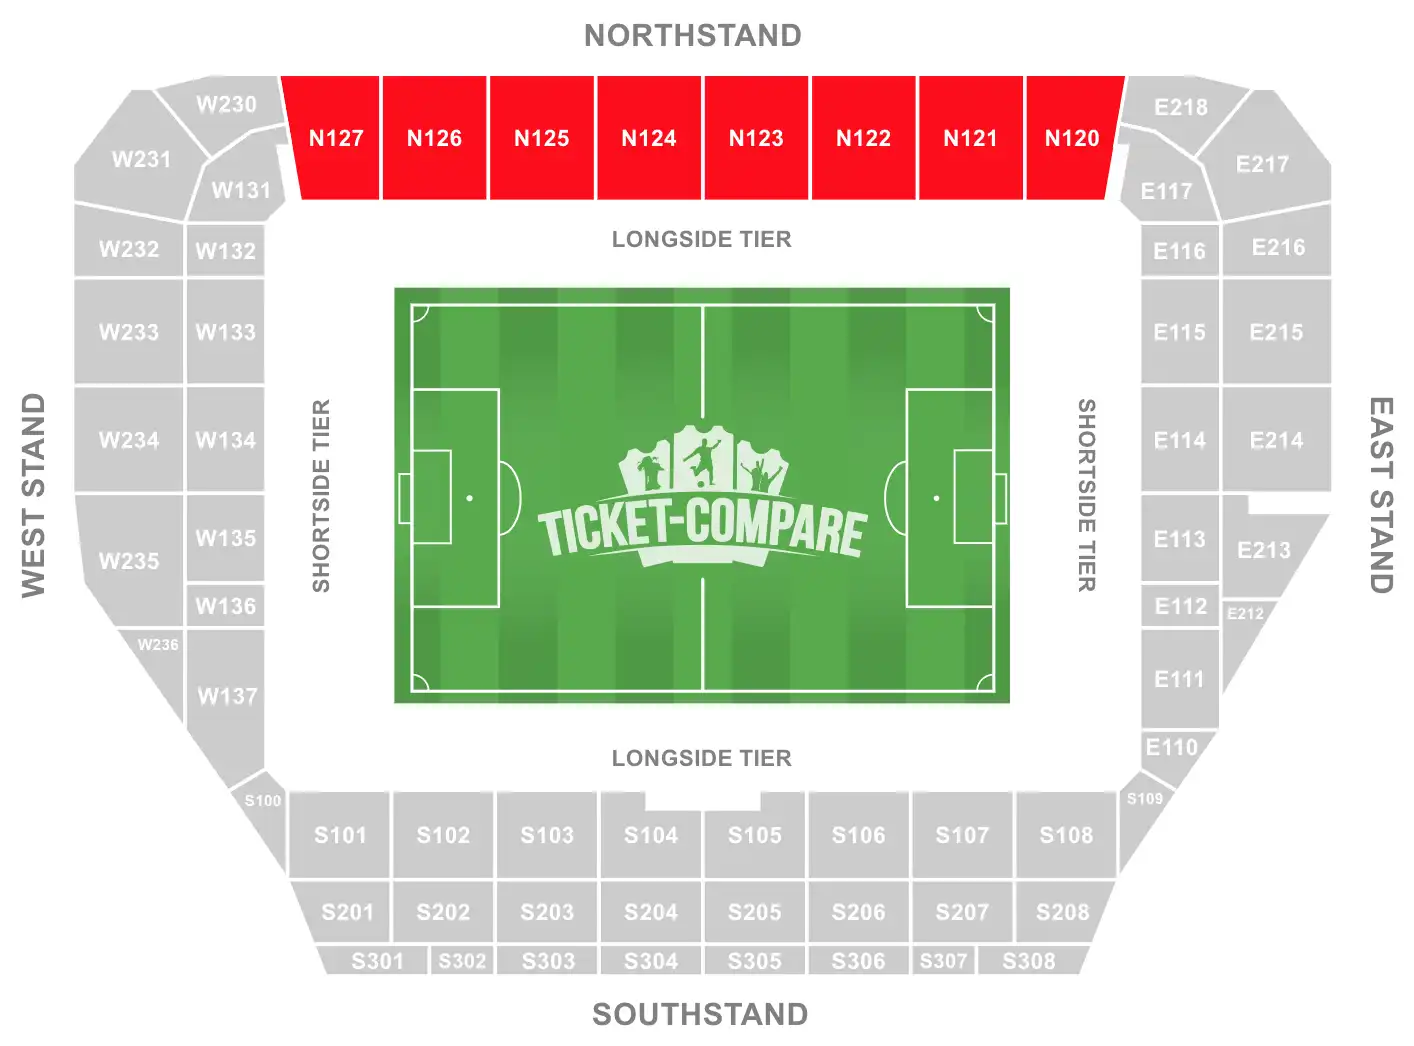 Community Stadium Seating Plan with highligted the North stand